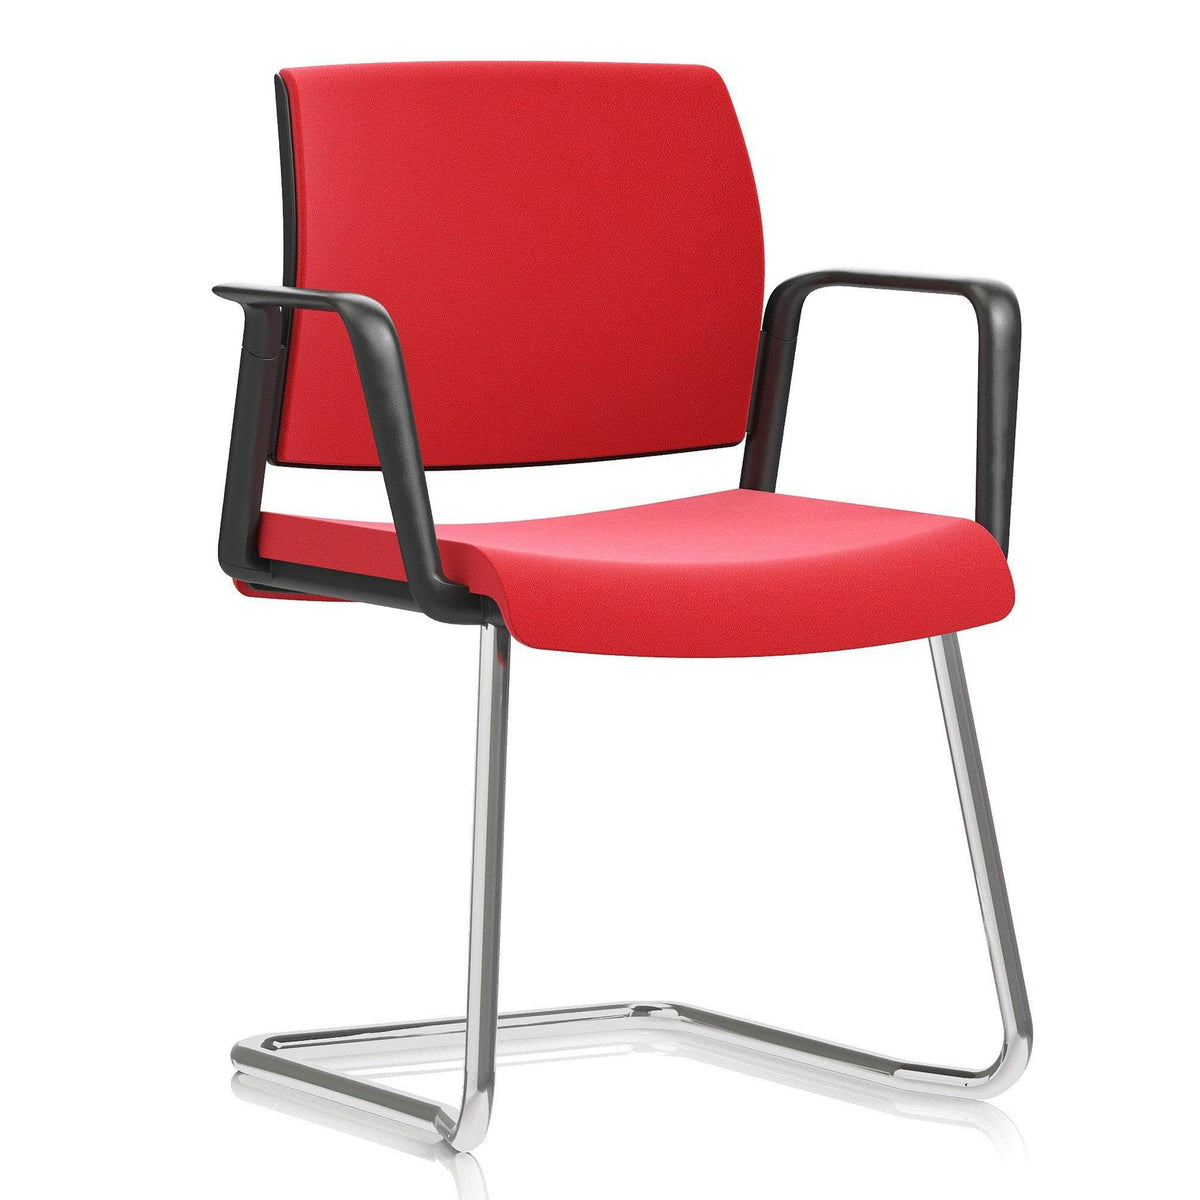 conference chair Cantilever Frame / With Arms Kindle Conference Chair Cantilever Frame / With Arms